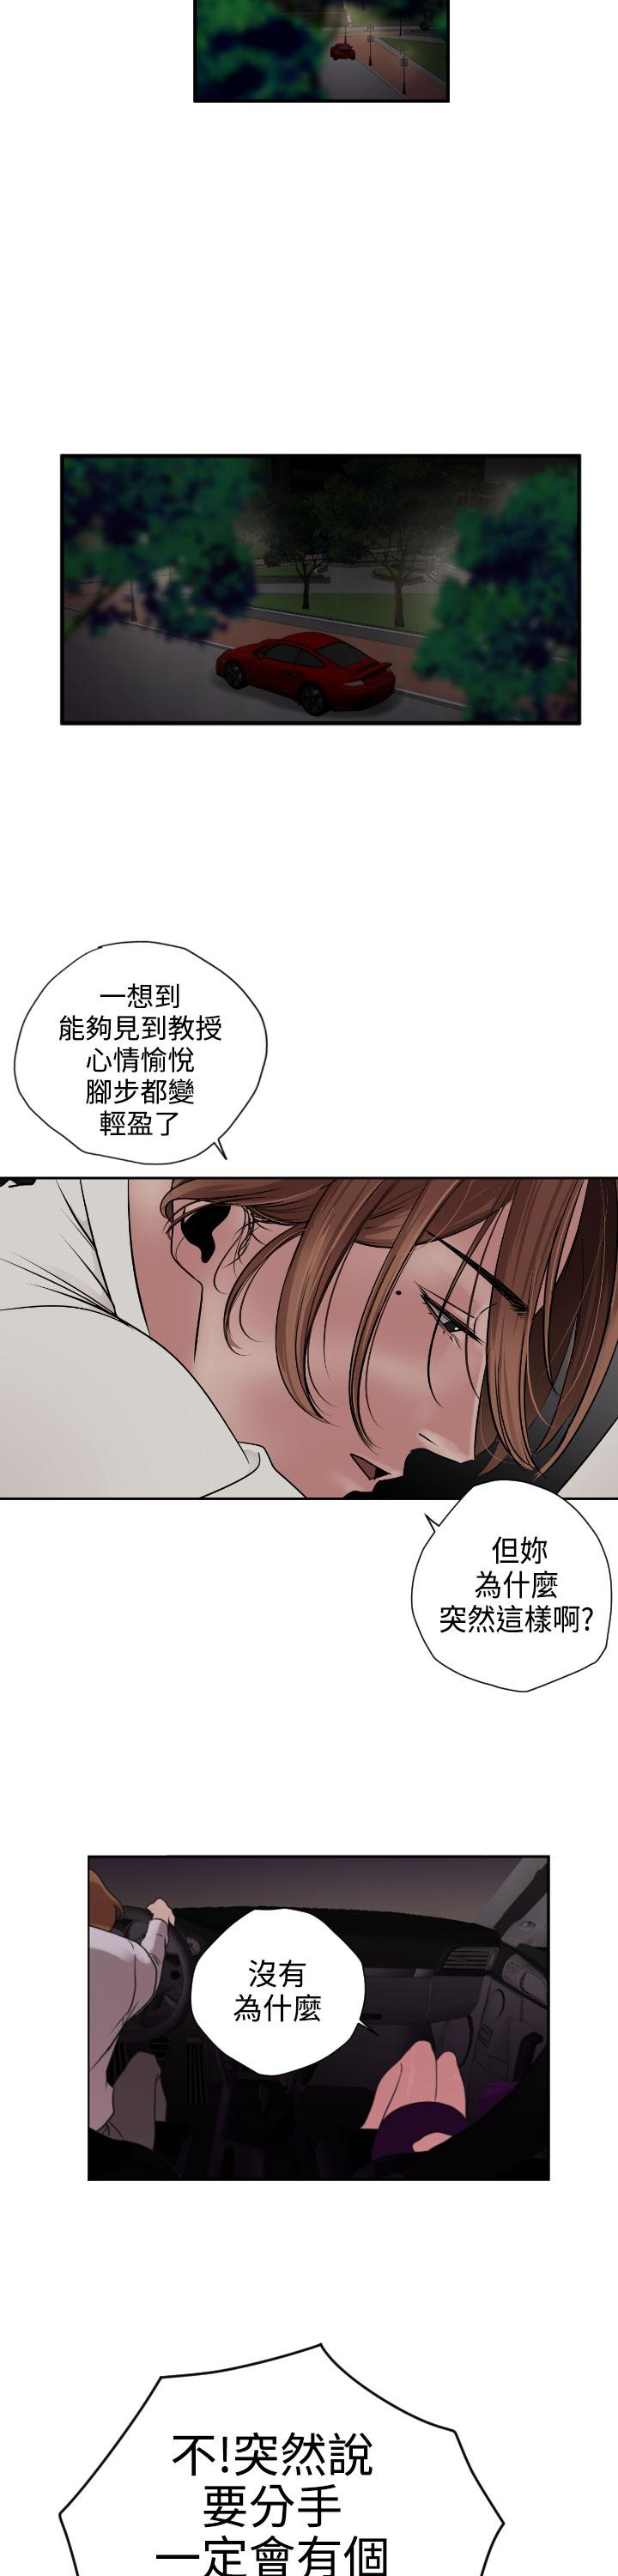 Desire King (慾求王) Ch.1-16 (chinese) 73